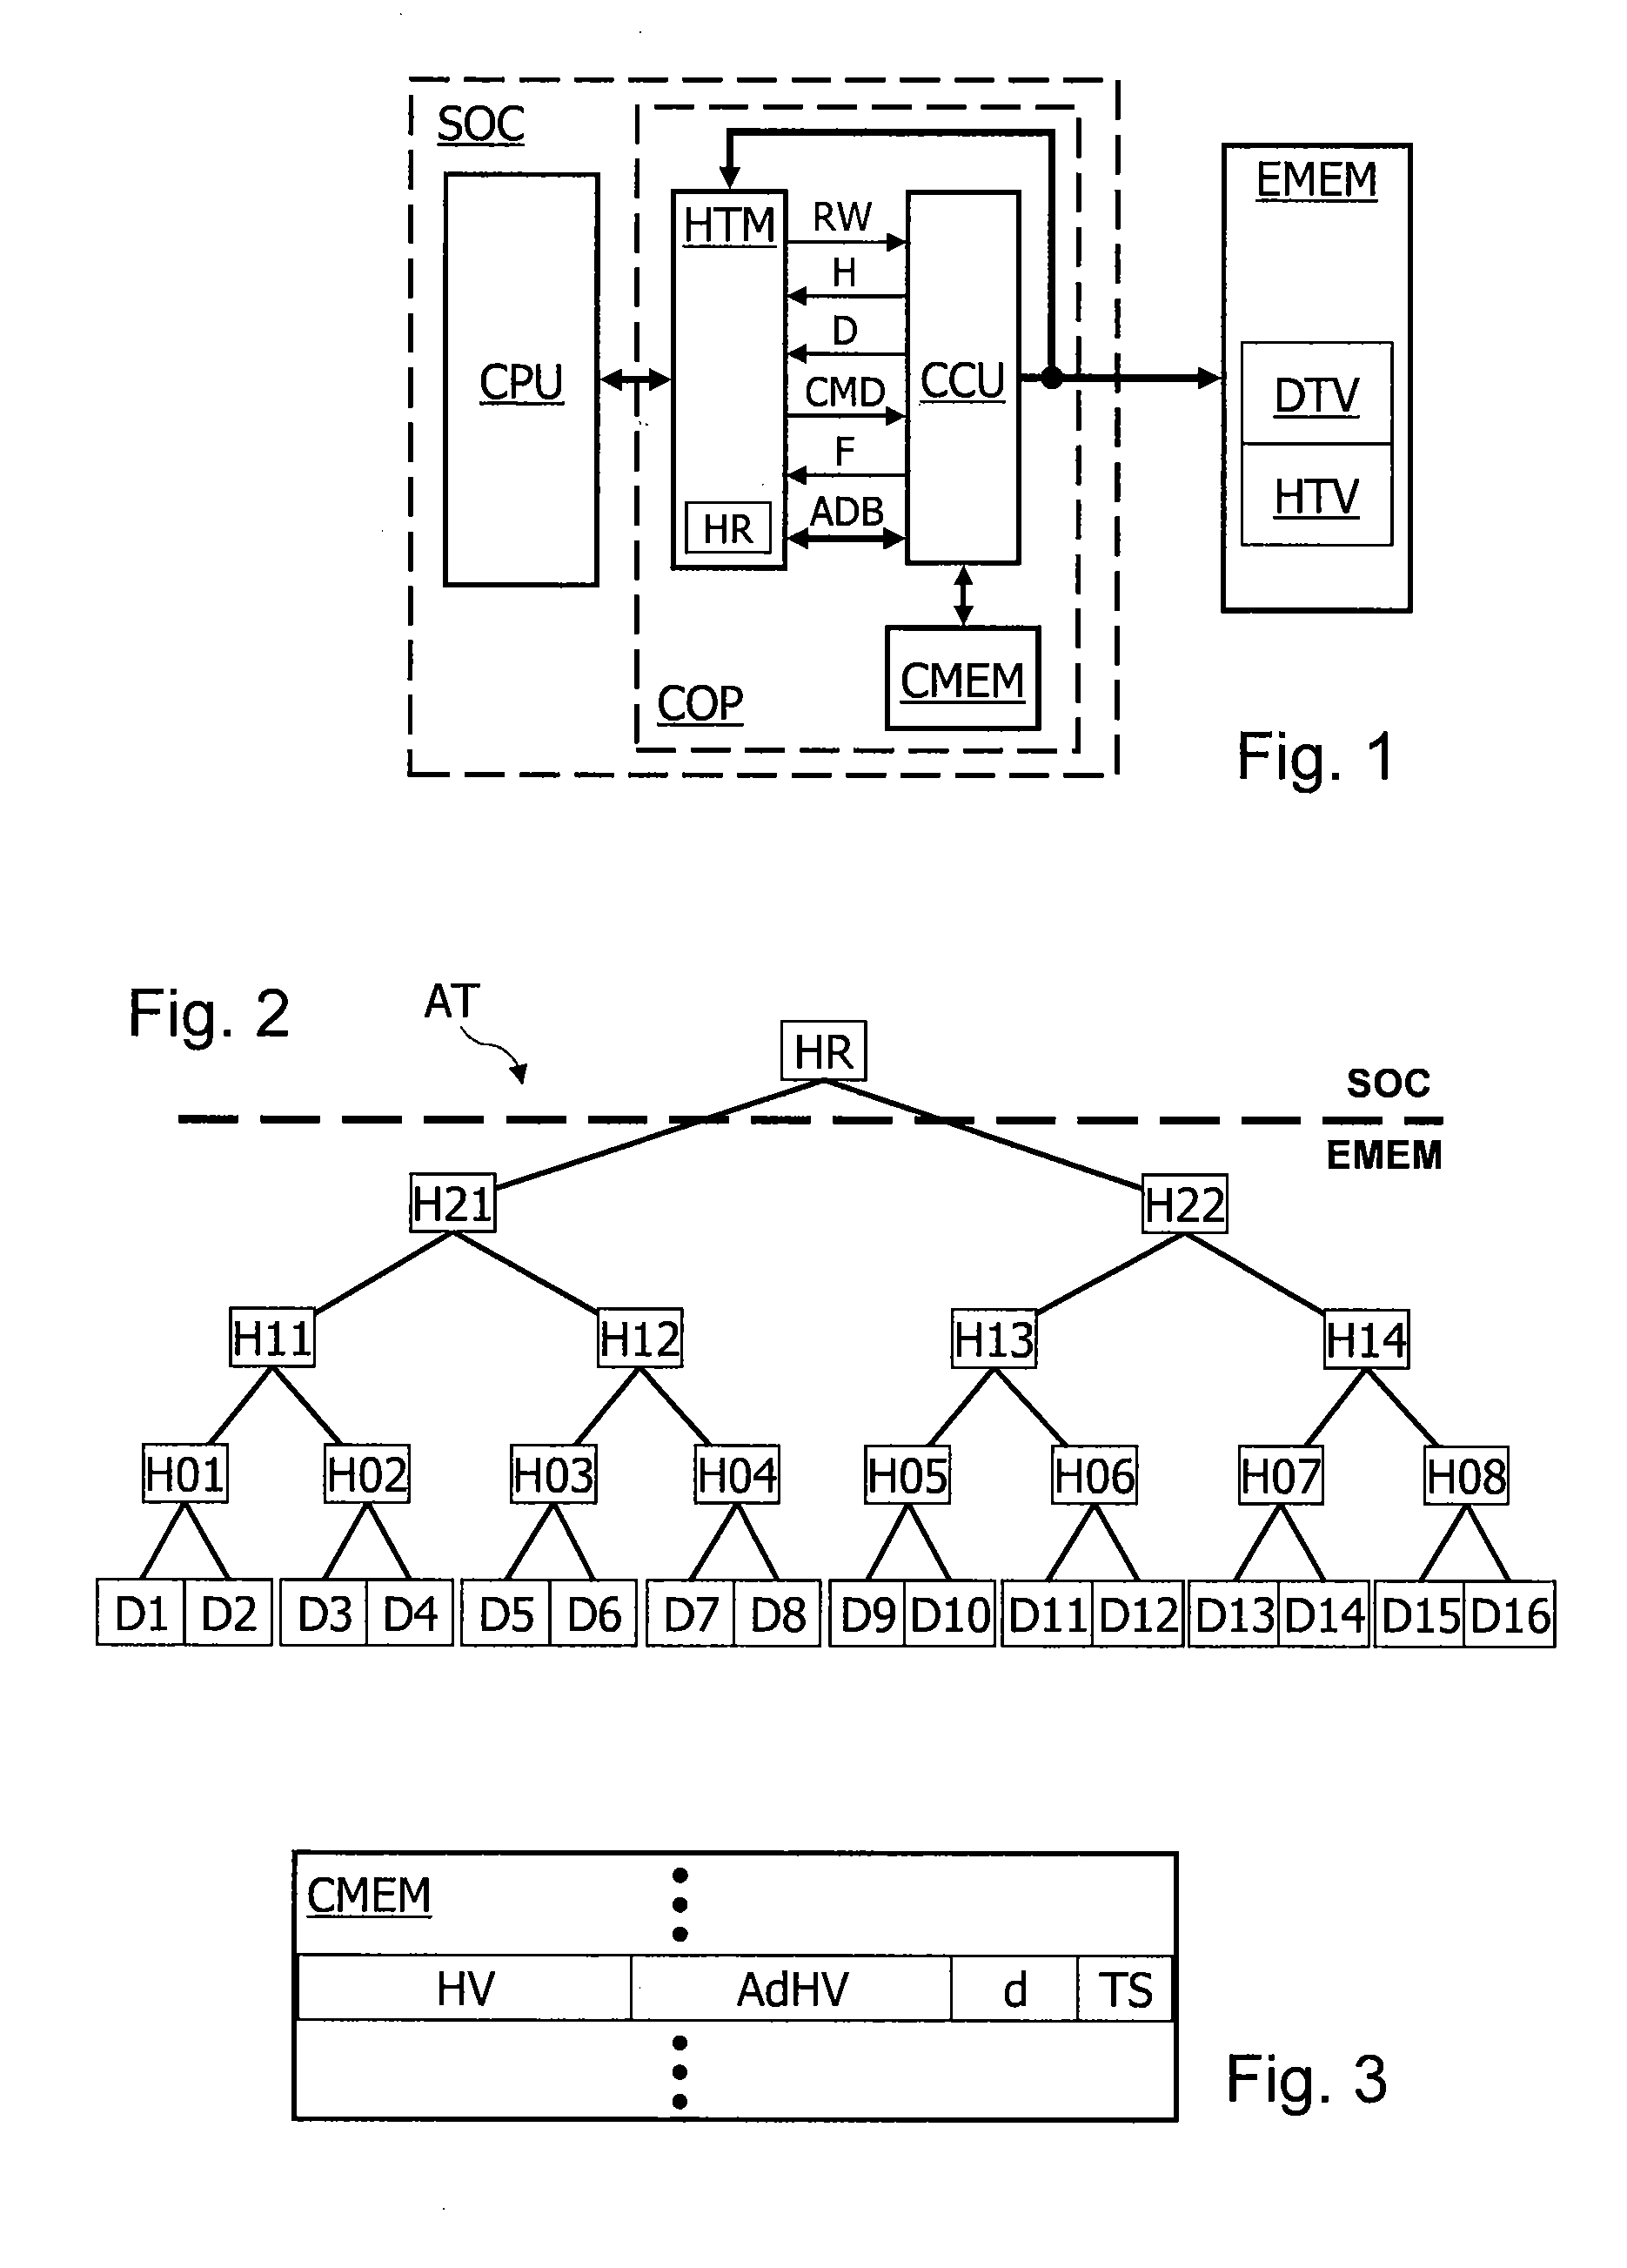 Cache-based method of hash-tree management for protecting data integrity